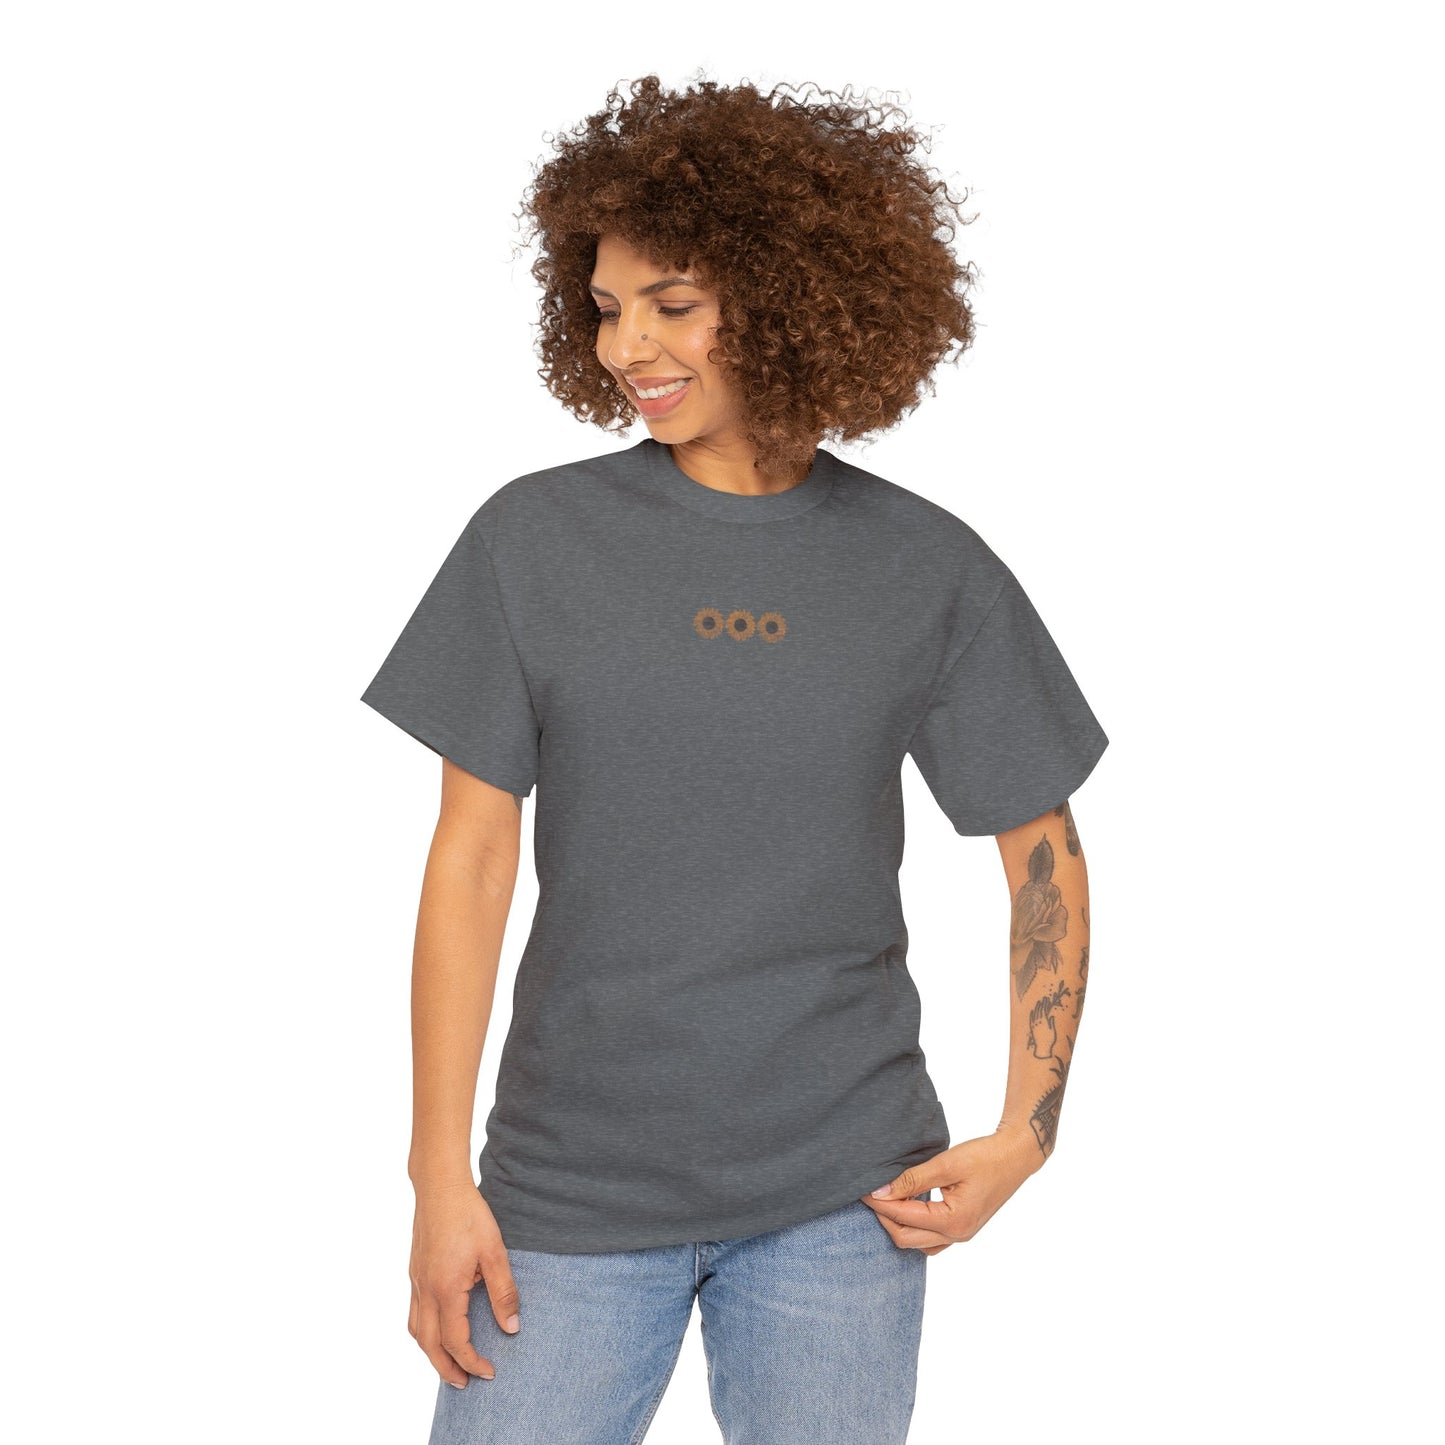 You are loved - Sunflower T-shirt